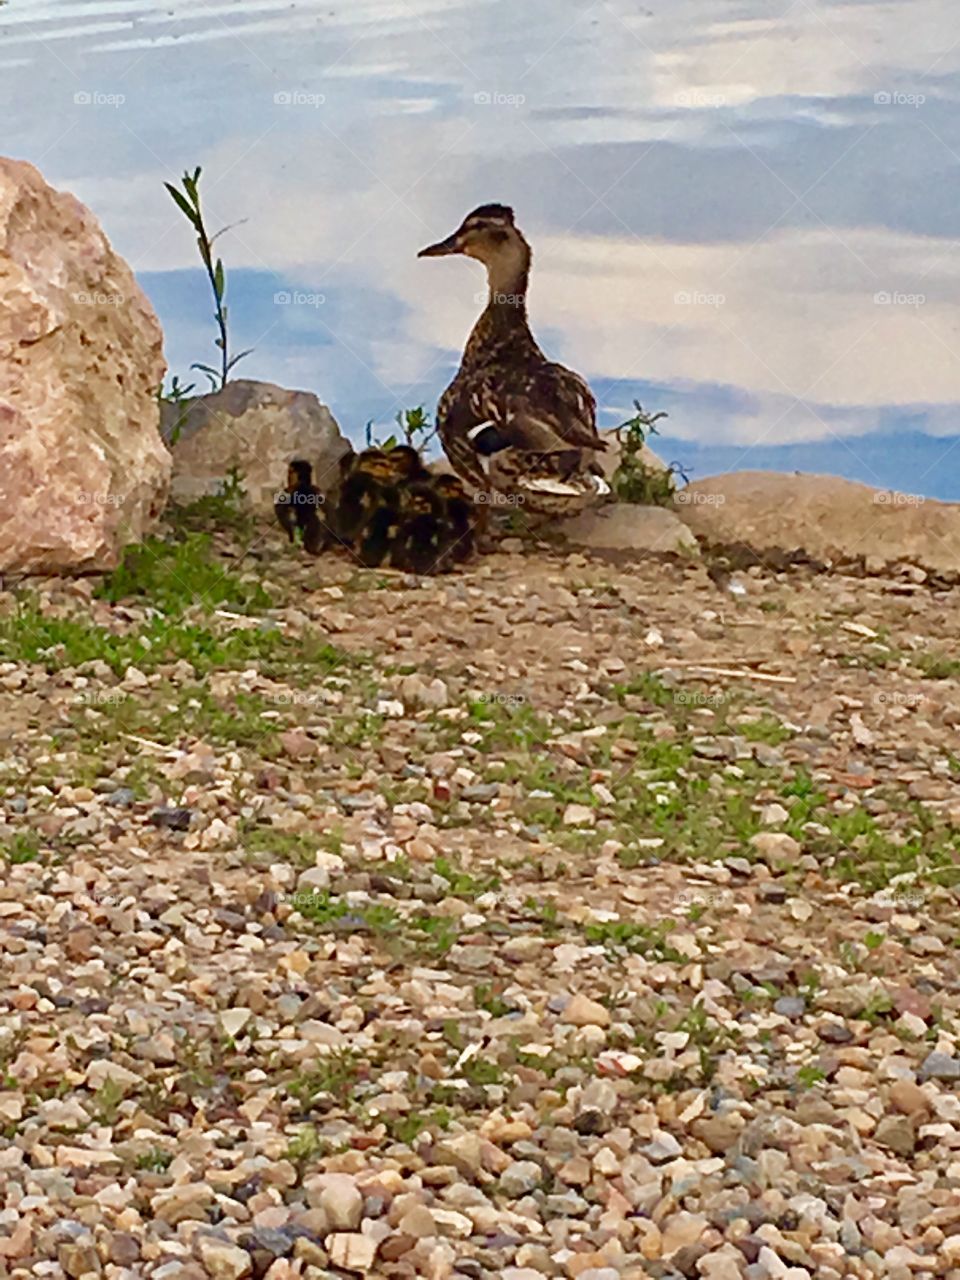 Mama duck. Protective. Babies. Fluffy. Downey. Beautiful. Water. Rocks. Ducklings.